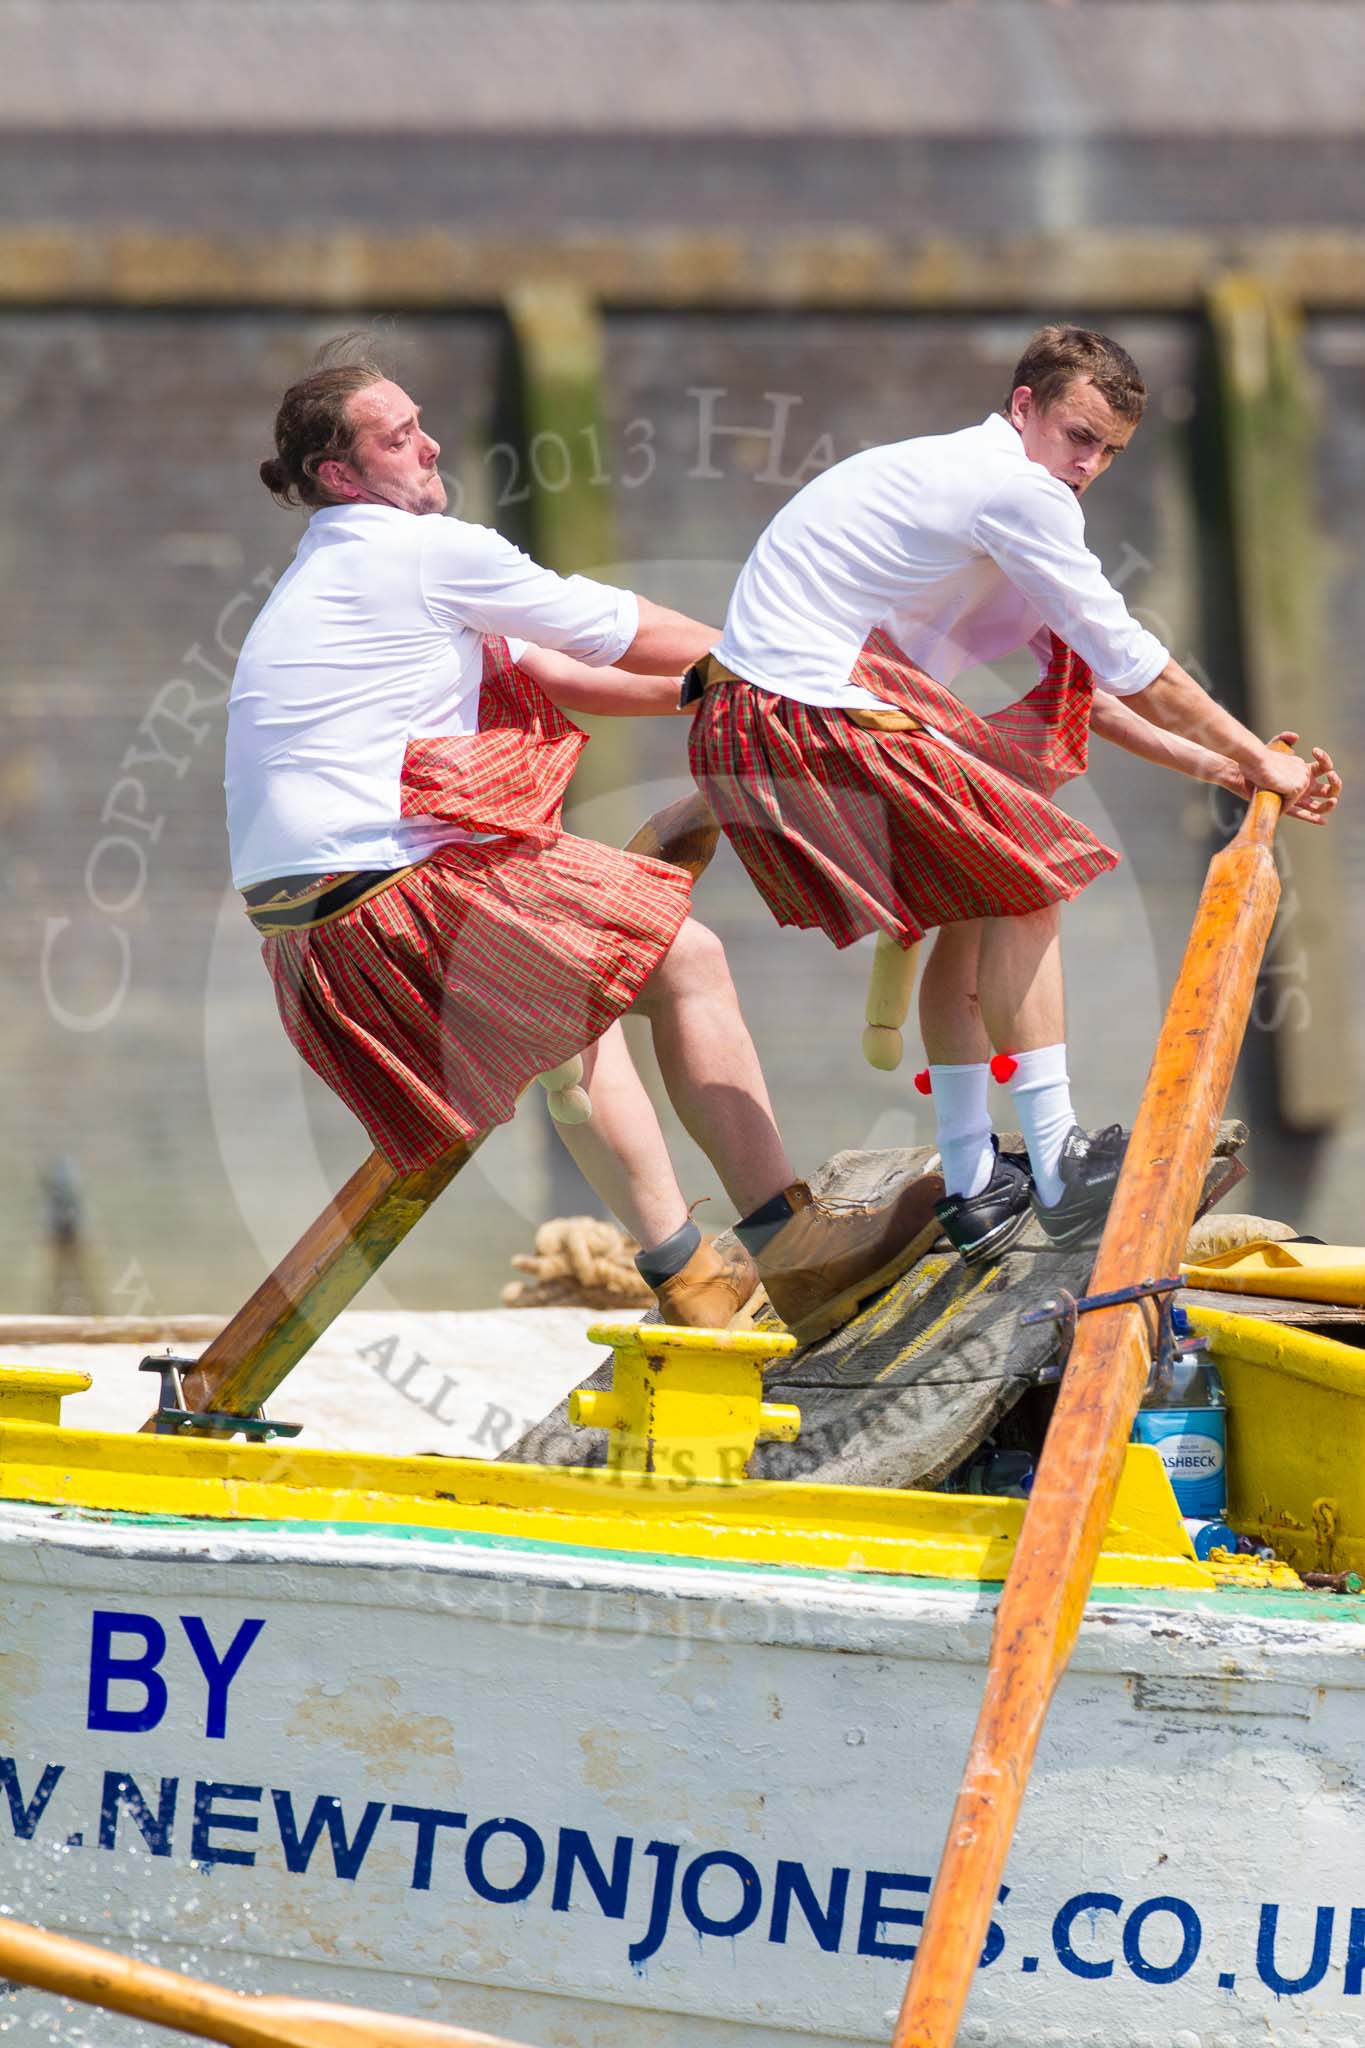 TOW River Thames Barge Driving Race 2013: Rowers wearing skirts on the deck of of barge "Hoppy" by GPS Fabrication..
River Thames between Greenwich and Westminster,
London,

United Kingdom,
on 13 July 2013 at 12:44, image #191